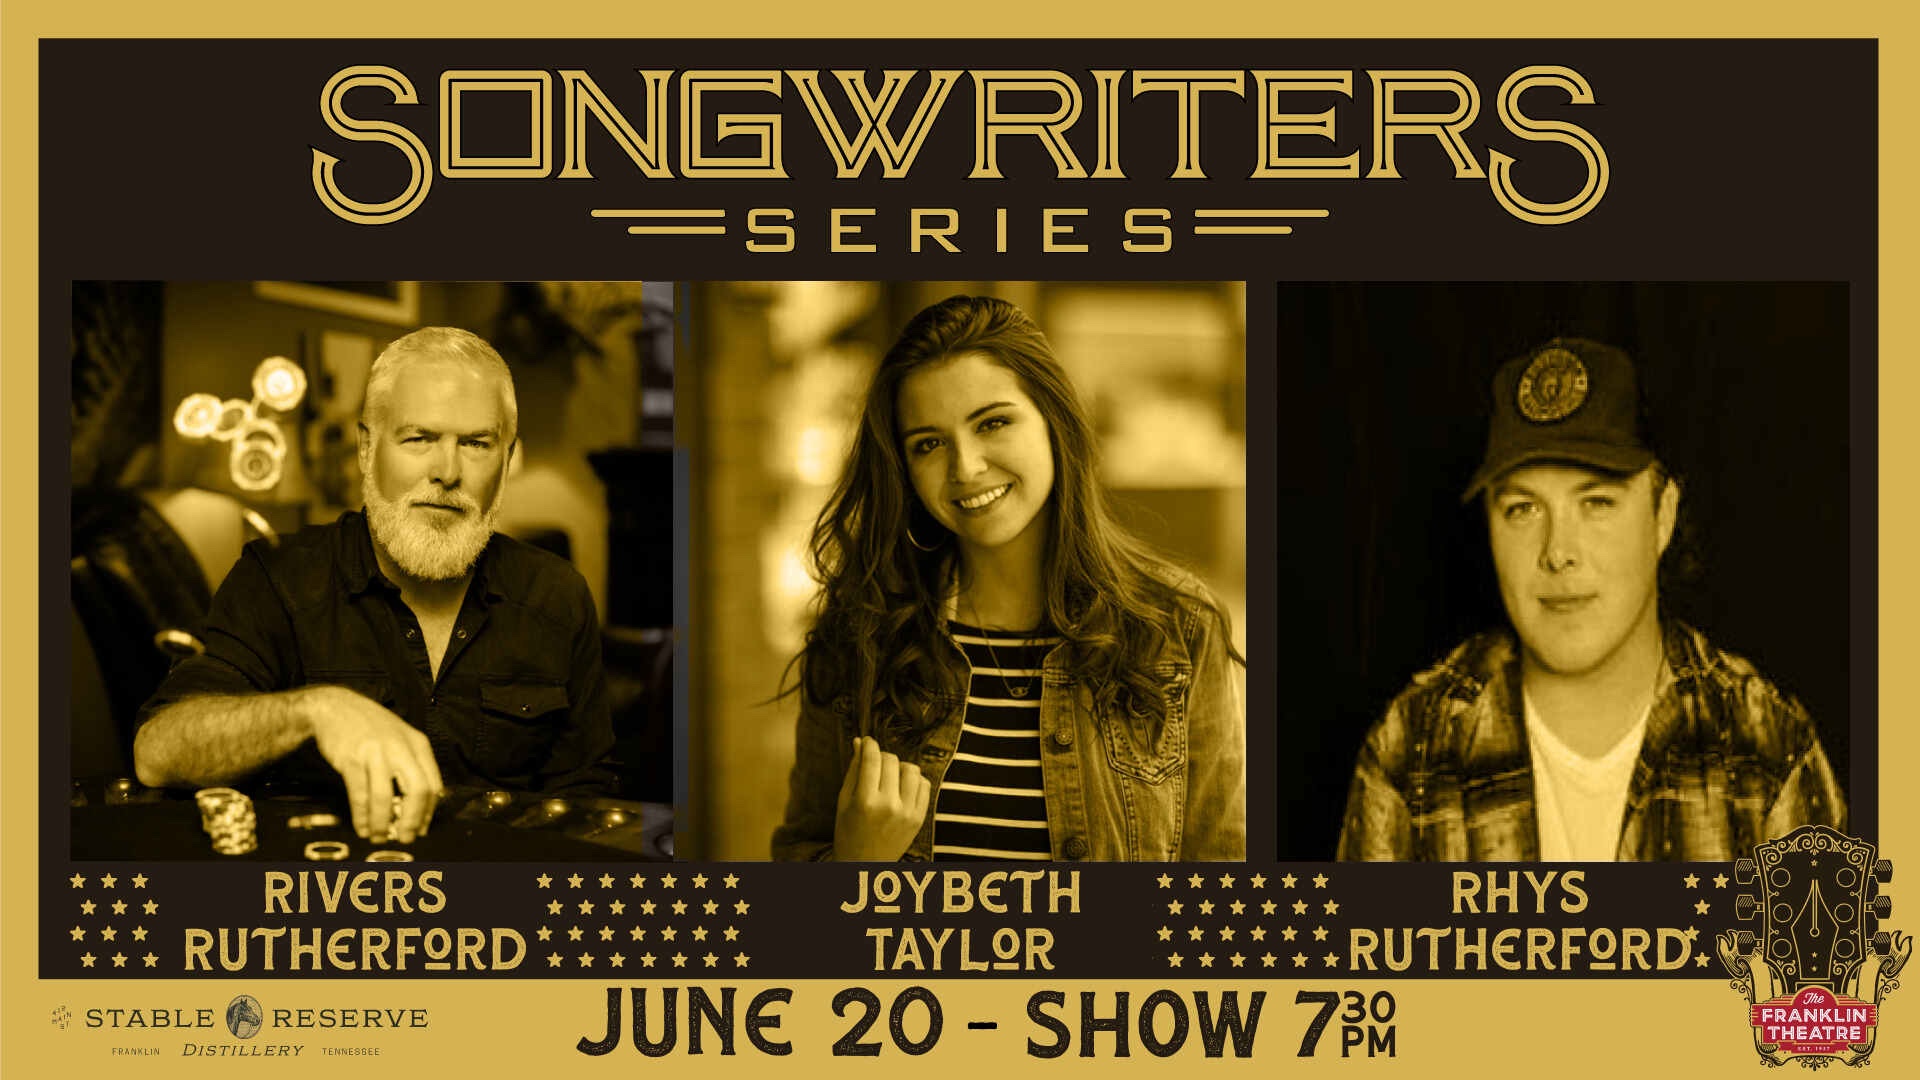 Franklin Theatre Songwriters Series Rivers Rutherford, Joybeth Taylor, and Rhys Rutherford.